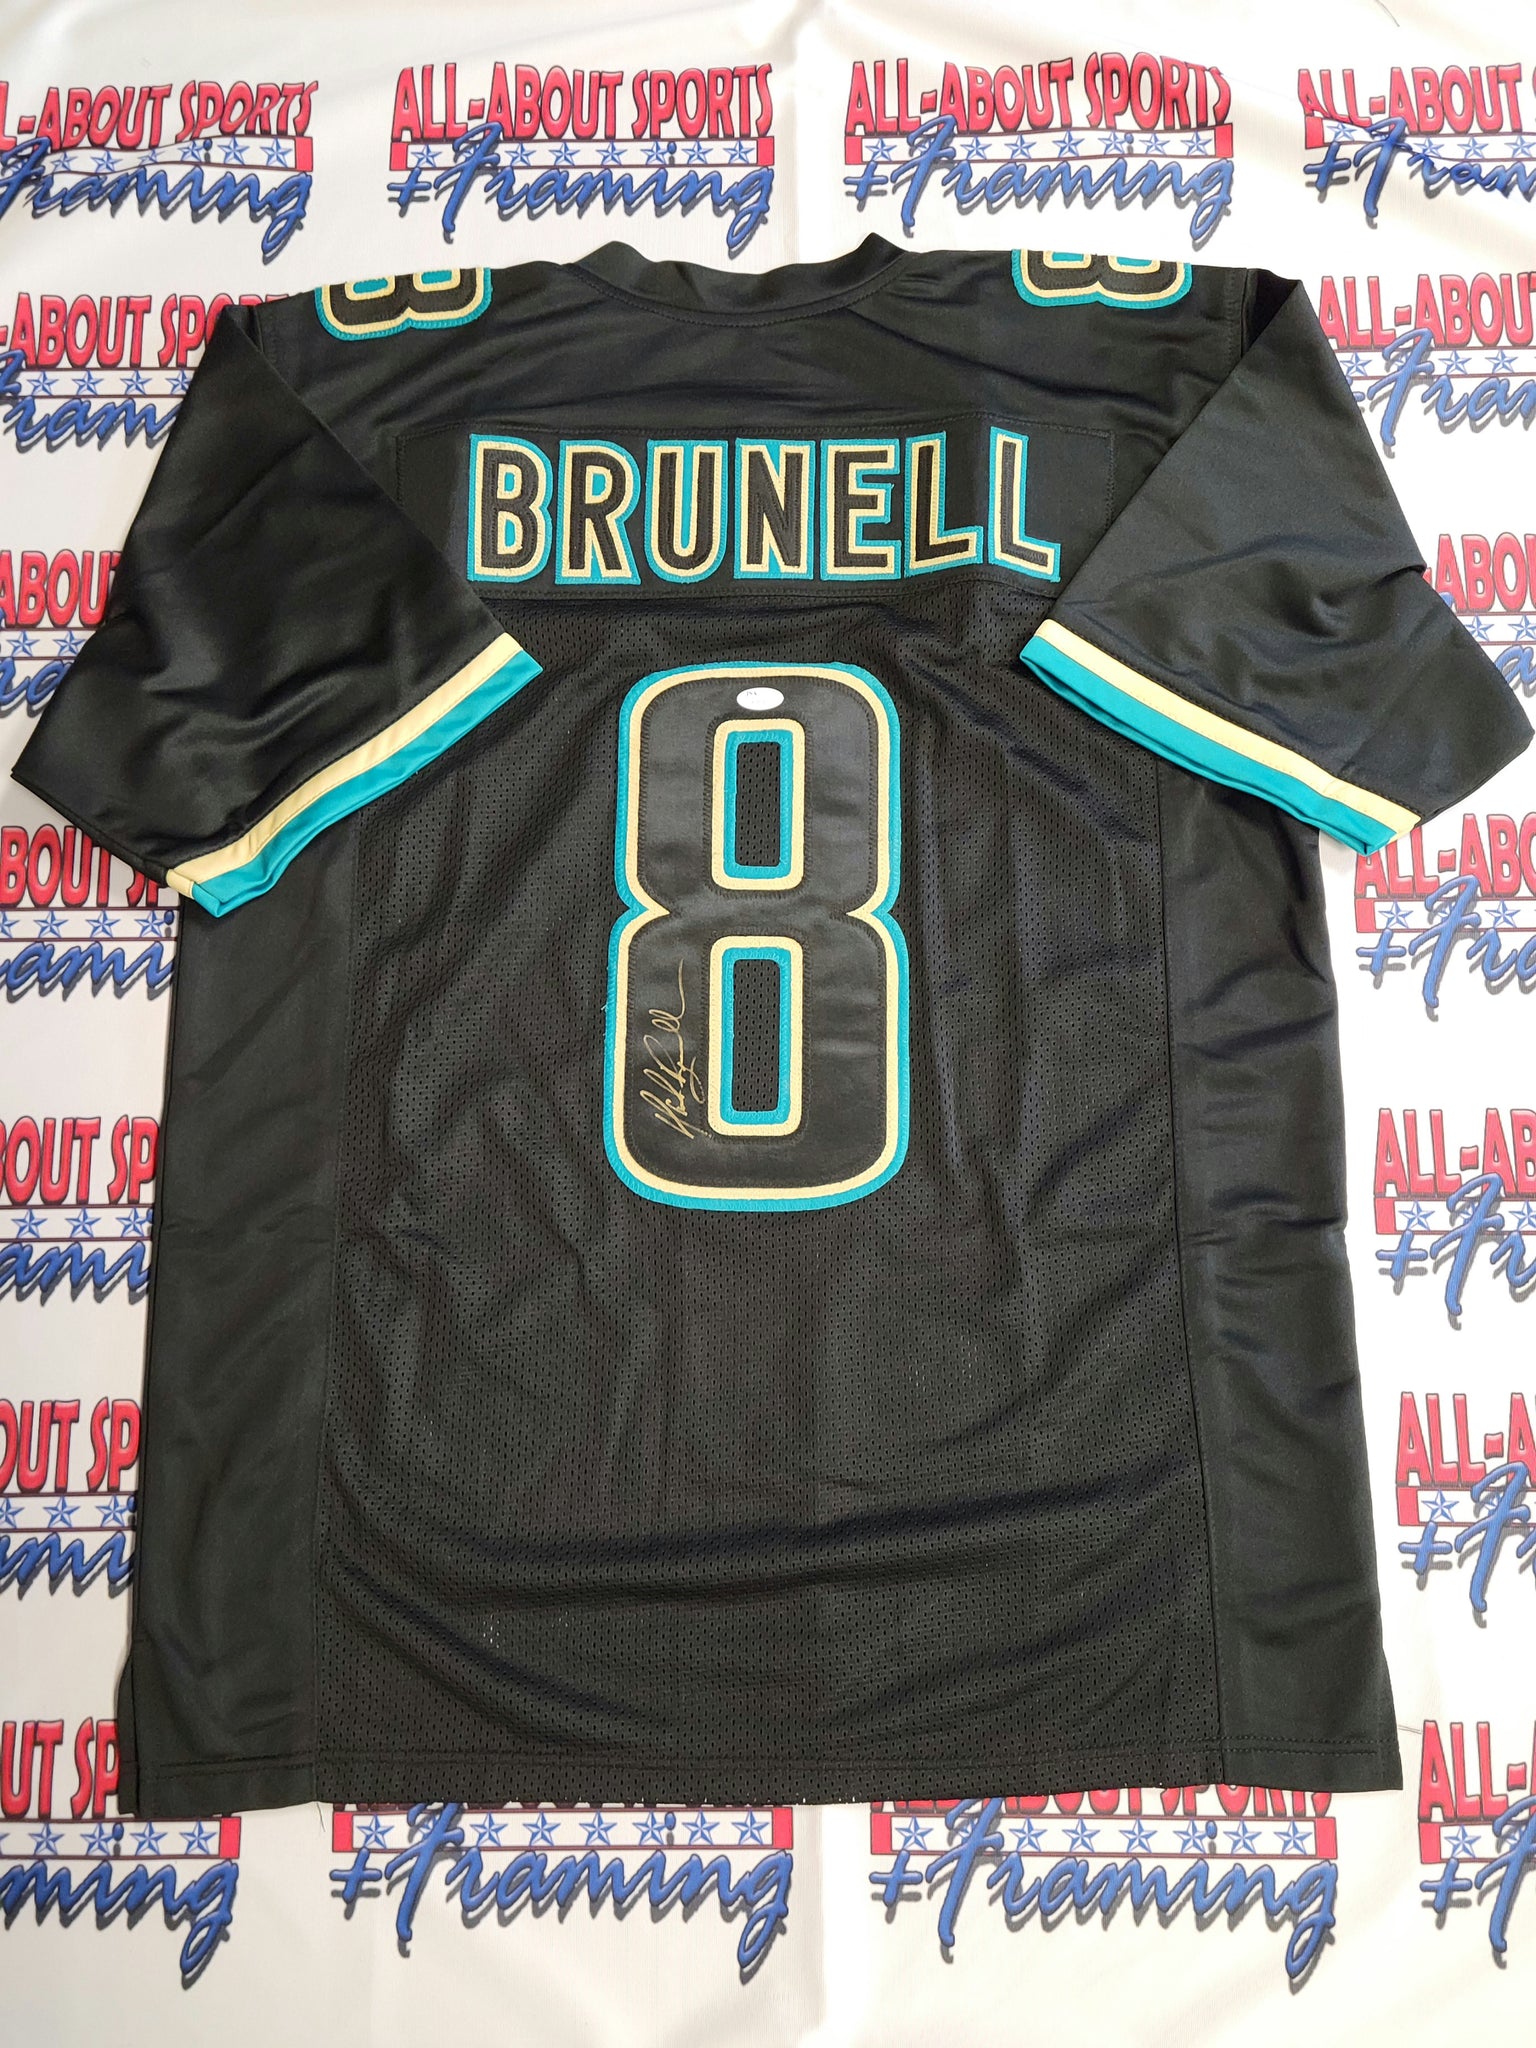 Mark Brunell Authentic Signed Pro Style Jersey Autographed JSA